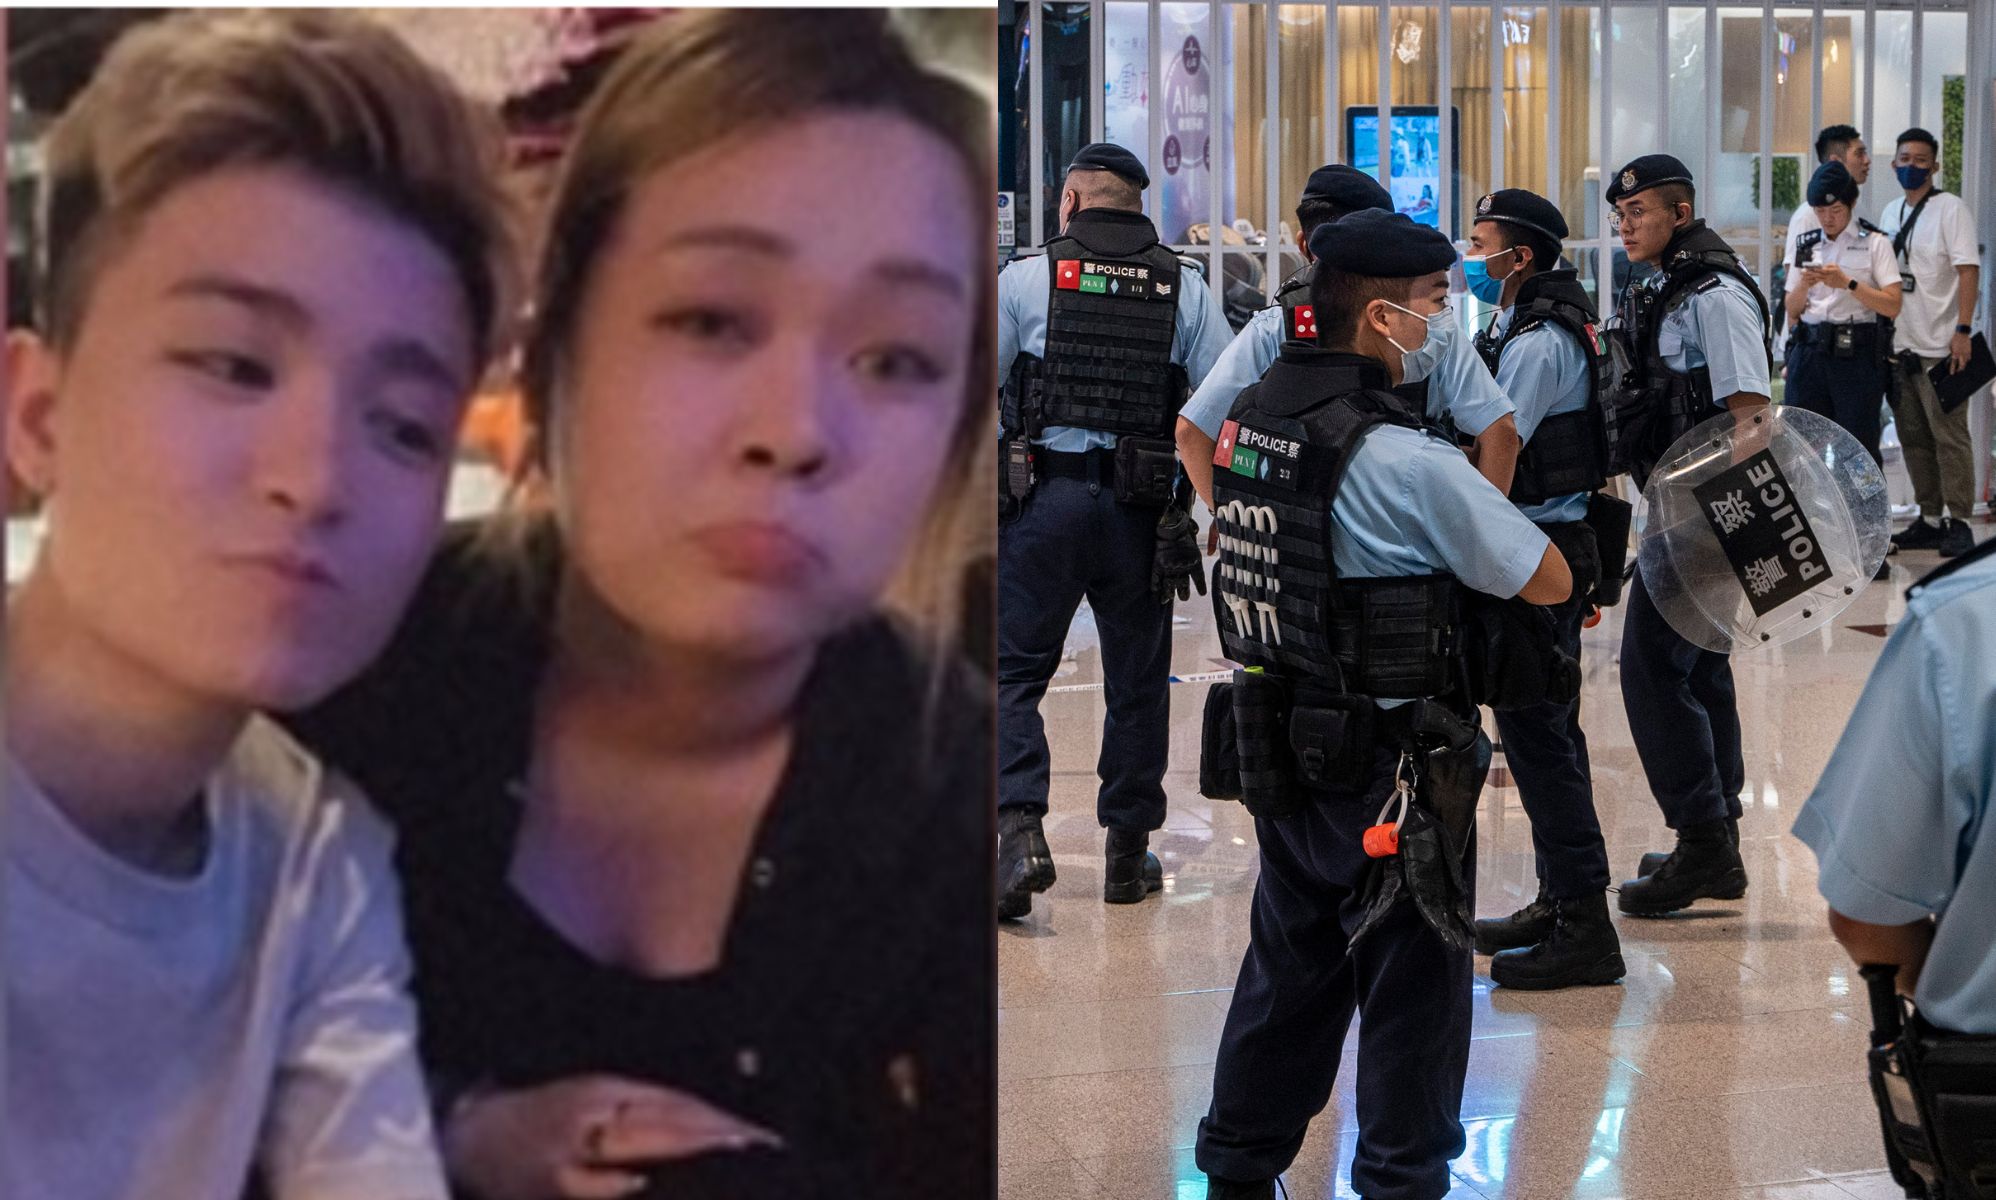 Lesbian couple stabbed to death in knife attack at Hong Kong mall pic